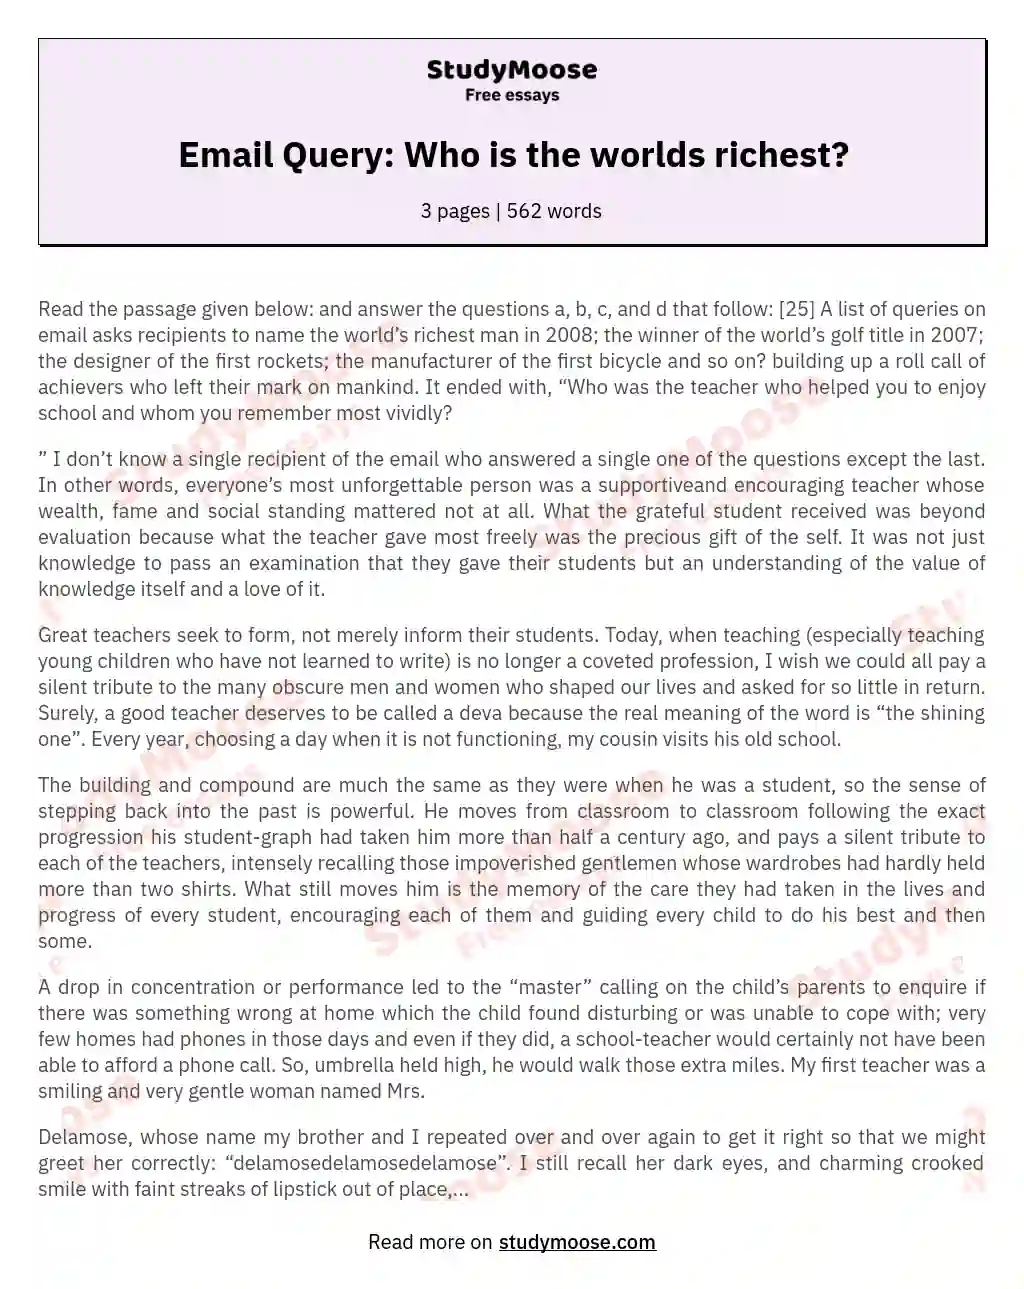 Email Query: Who is the worlds richest?